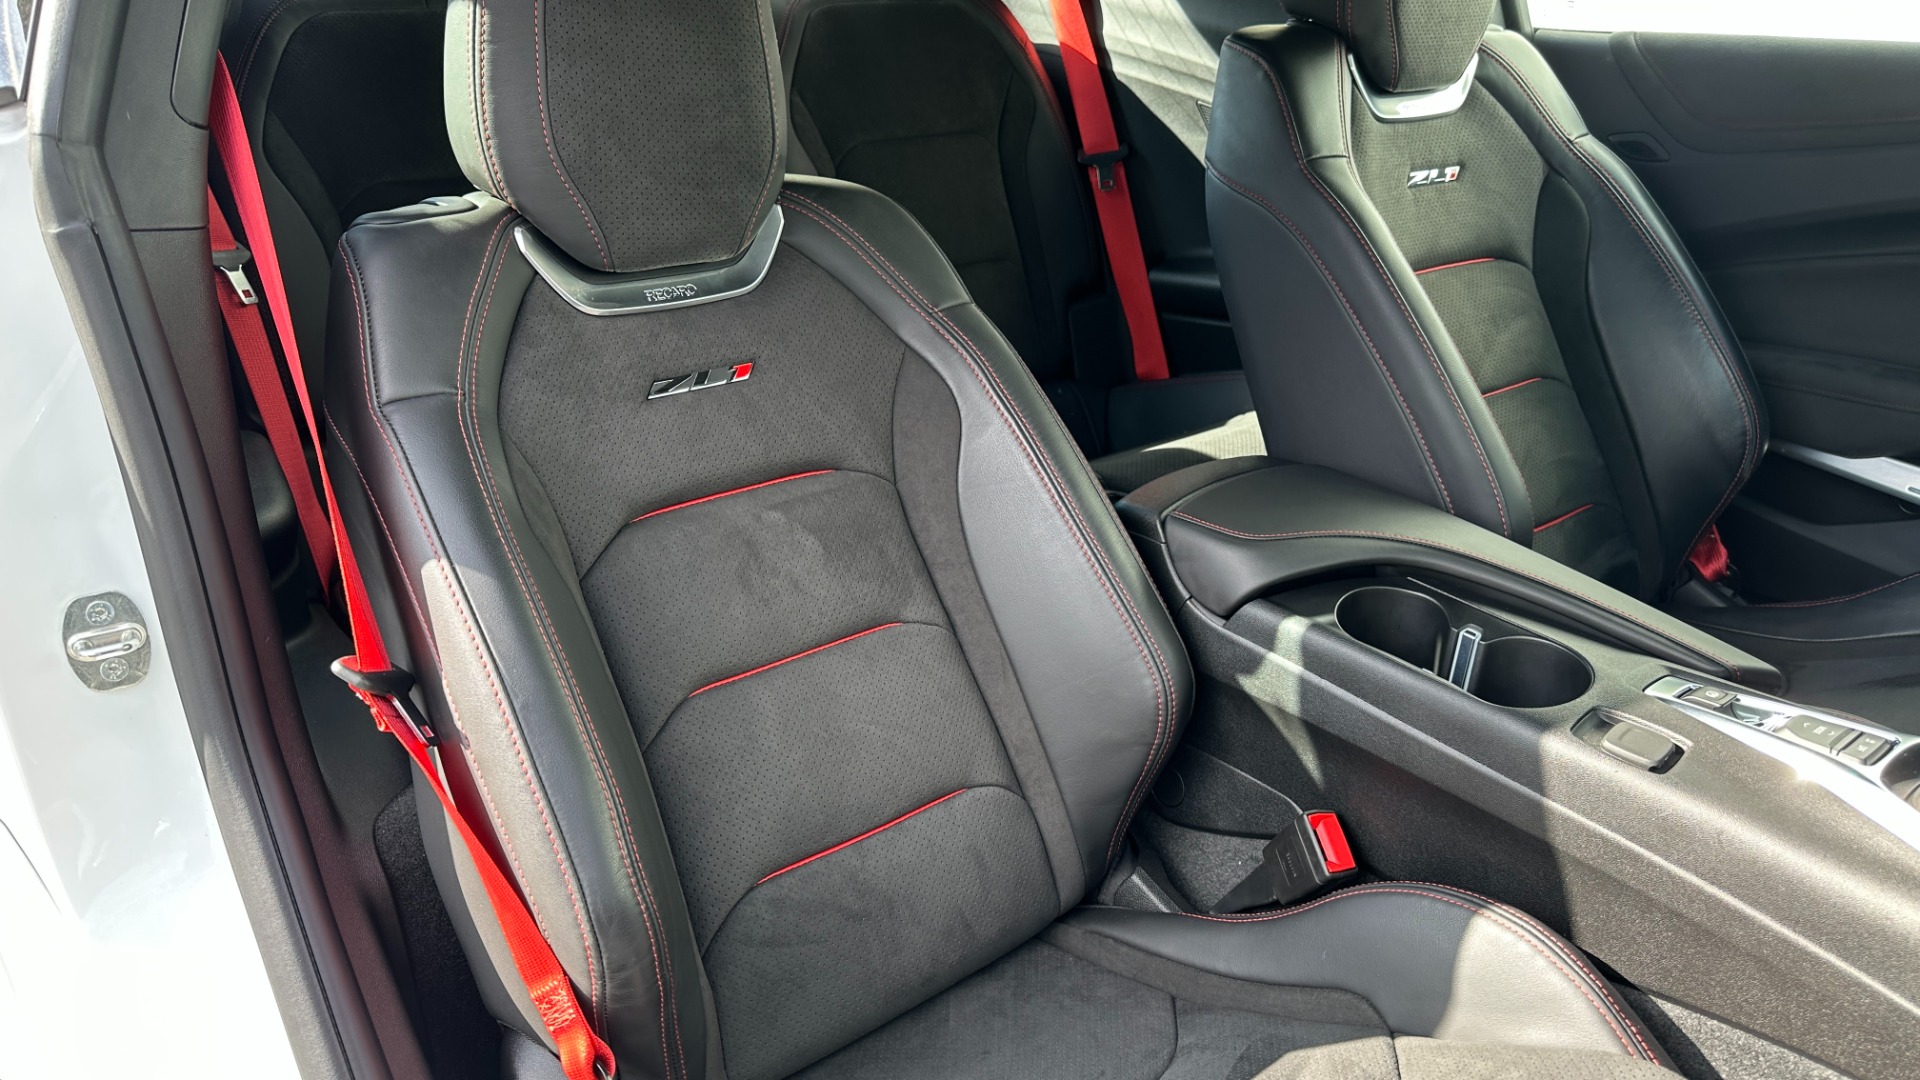 Used 2020 Chevrolet Camaro ZL1 / SUPERCHARGED / CARBON FIBER / RED SEAT BELTS / RECARO SEATING / 10SPD for sale $66,995 at Formula Imports in Charlotte NC 28227 25